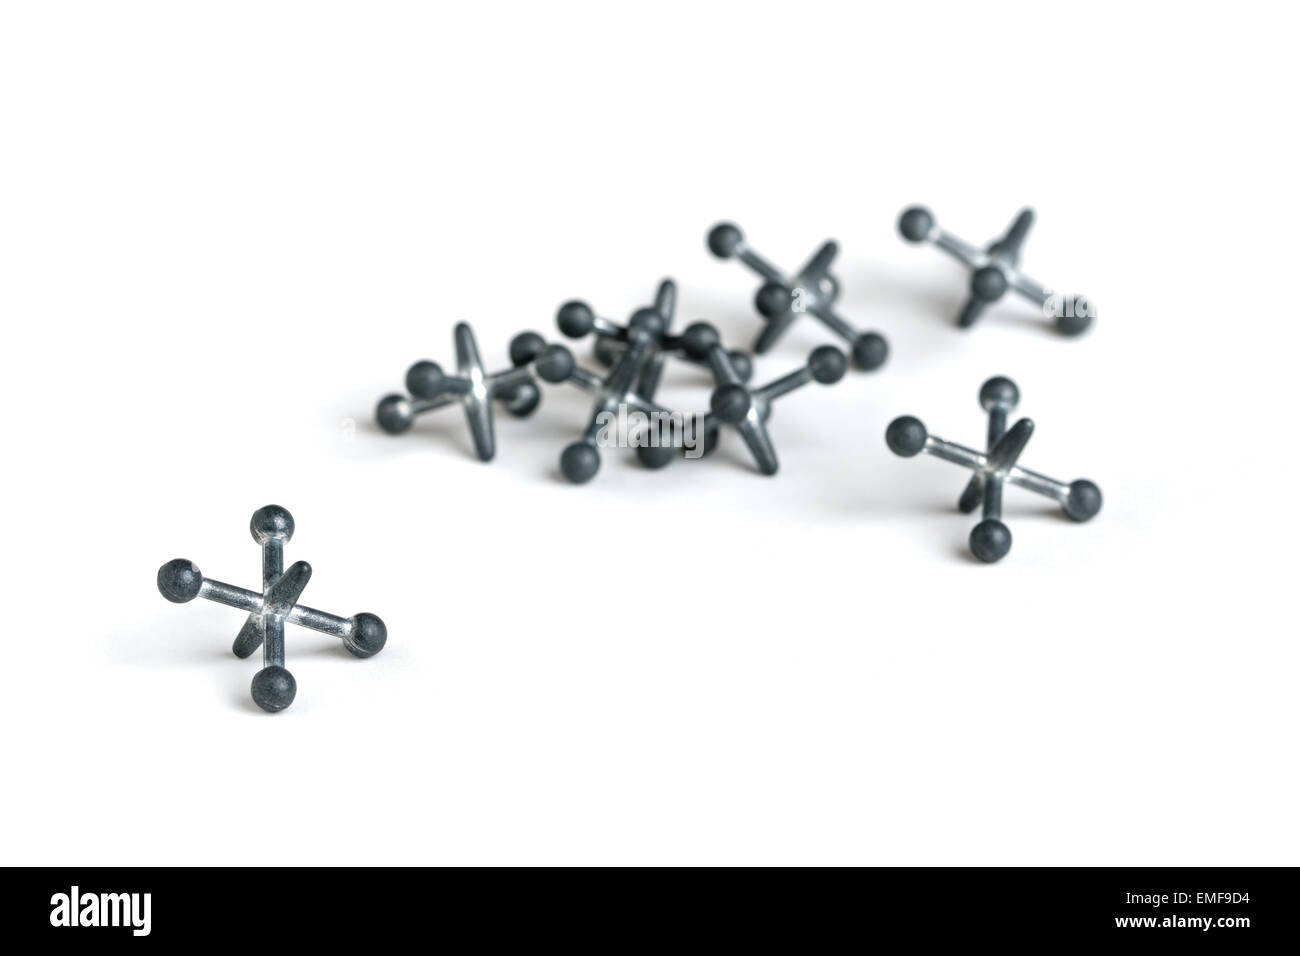 A set of metal jacks isolated against a white background. Stock Photo